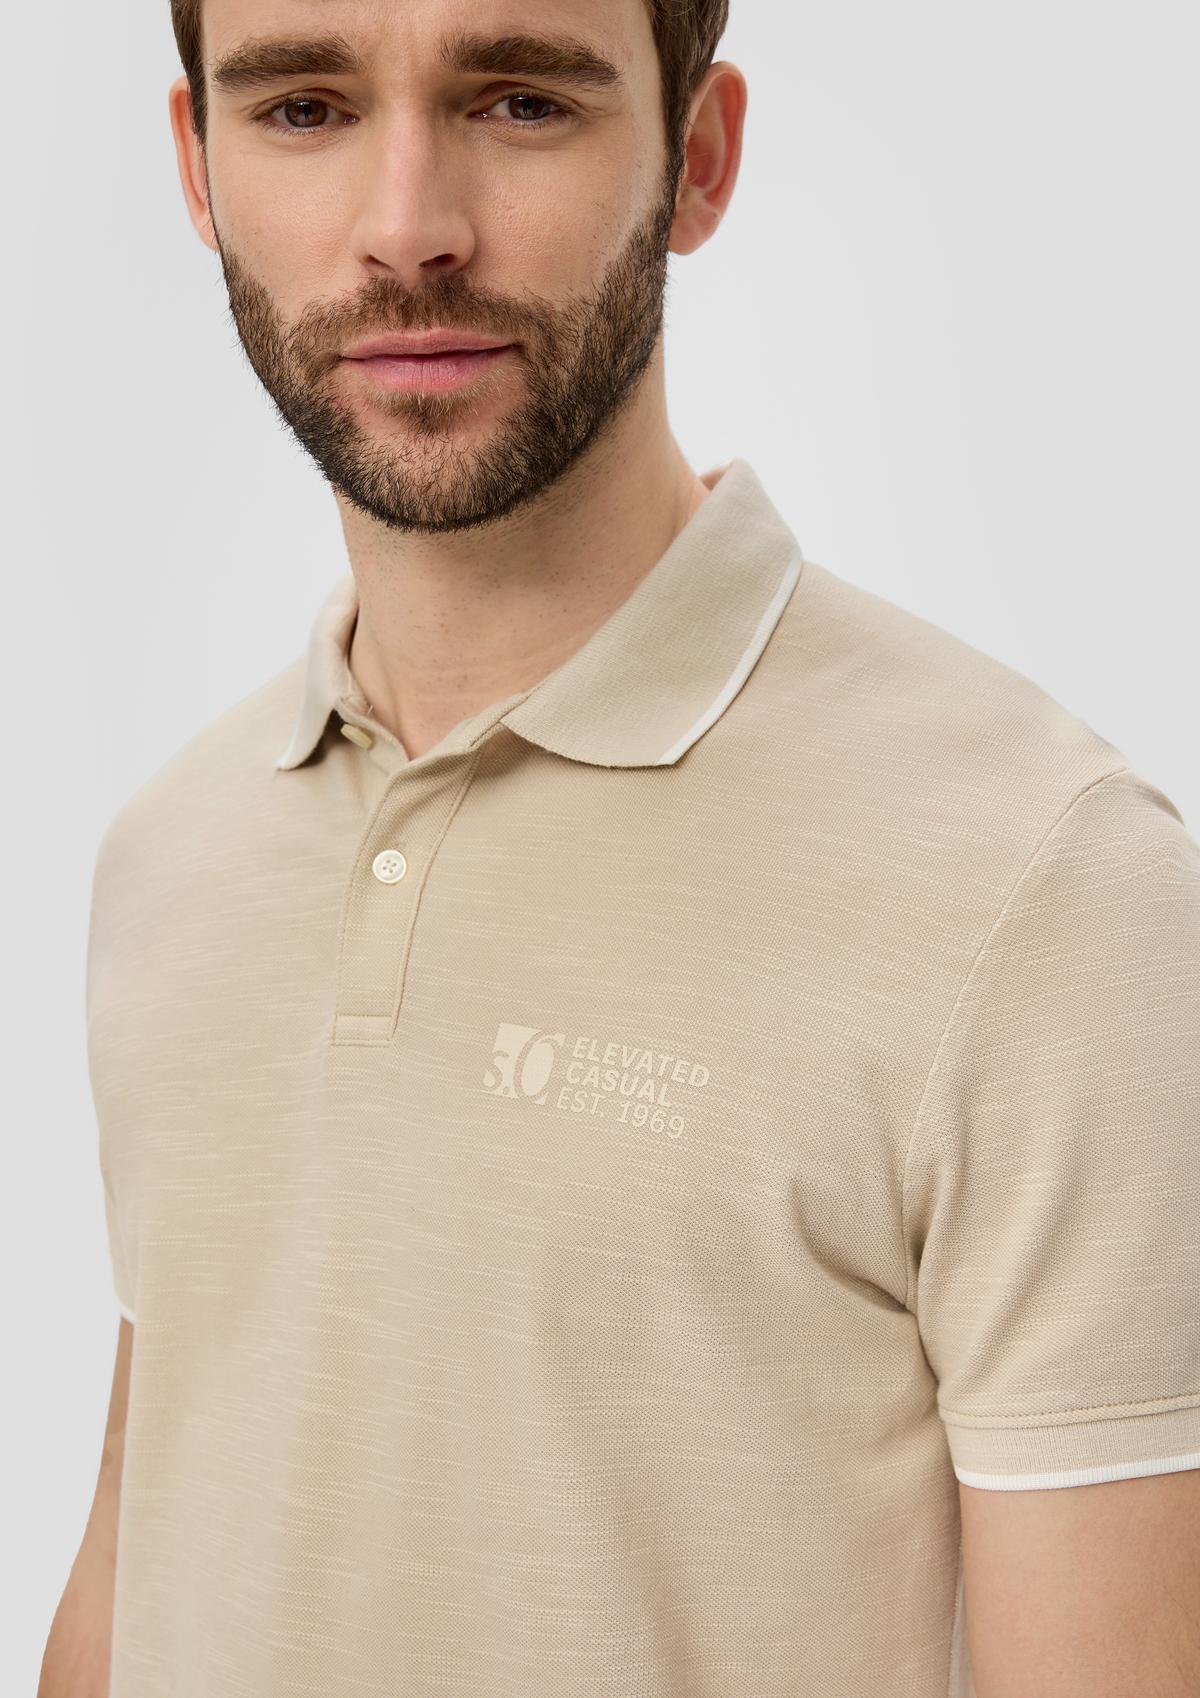 s.Oliver Polo shirt with a piqué texture and logo print